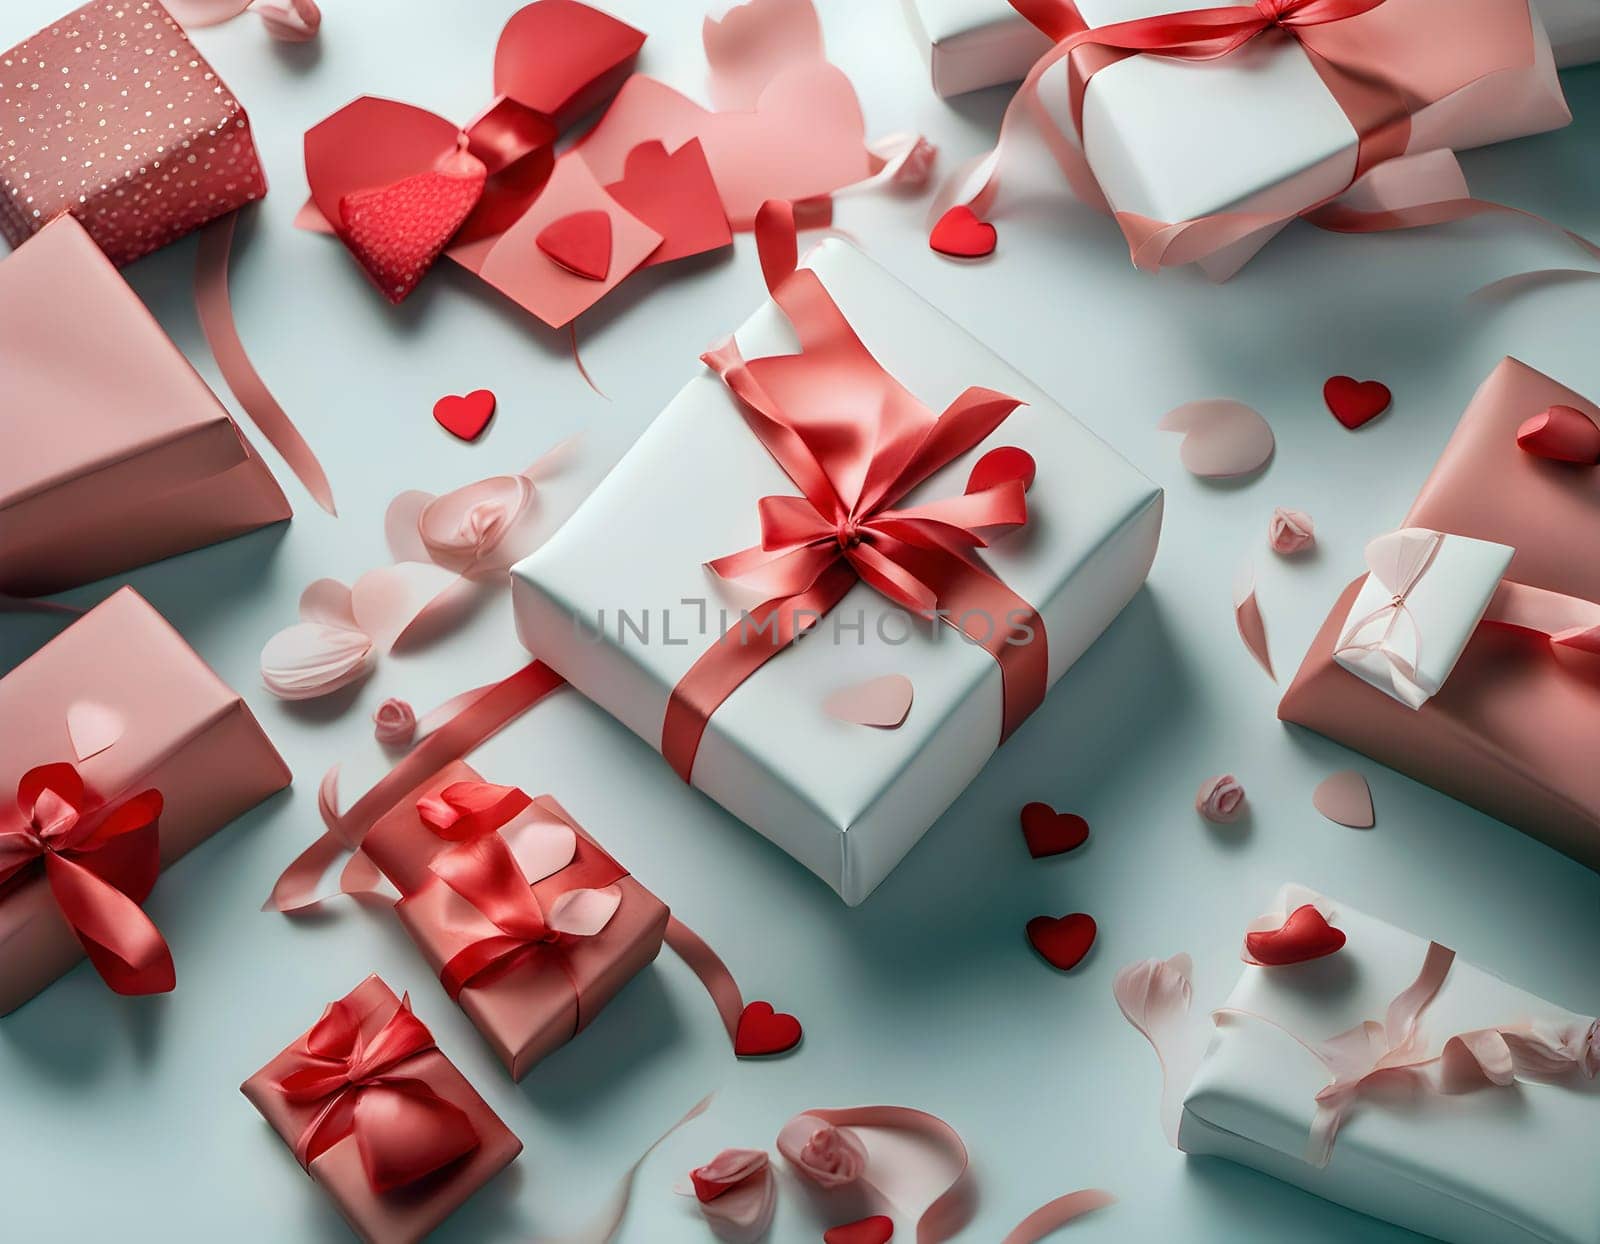 Assortment of Elegant Gift Boxes with Heart Decorations by rostik924